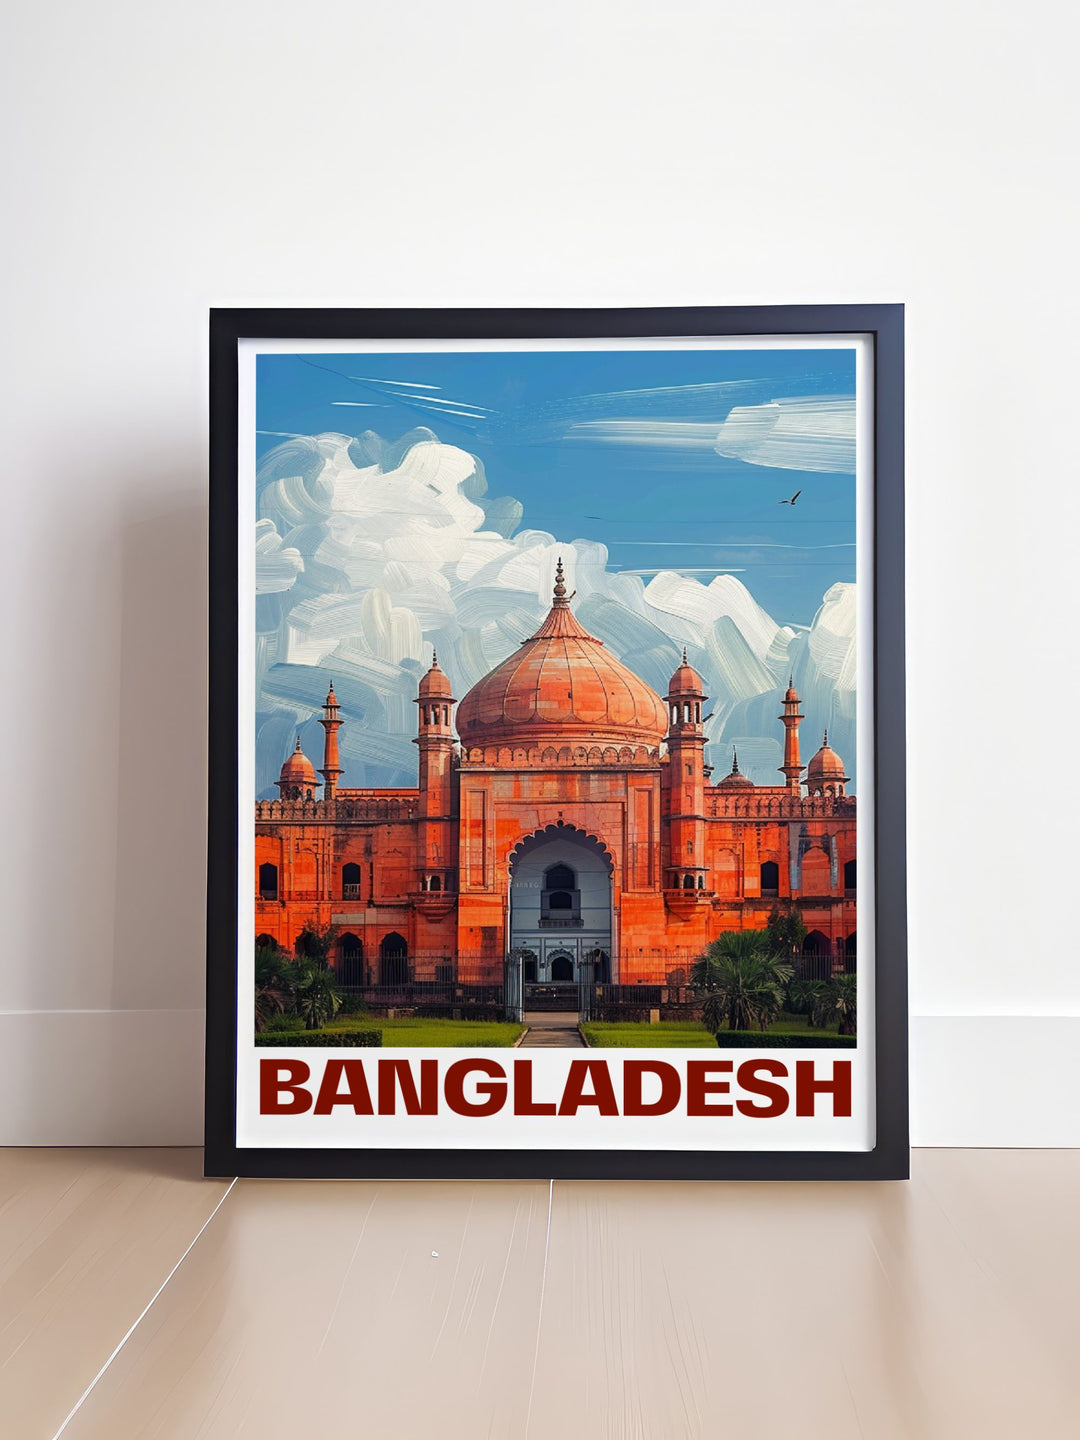 Highlighting the rich heritage of Dhaka, this travel poster features the impressive Lalbagh Fort complex, ideal for history enthusiasts and home decor lovers.